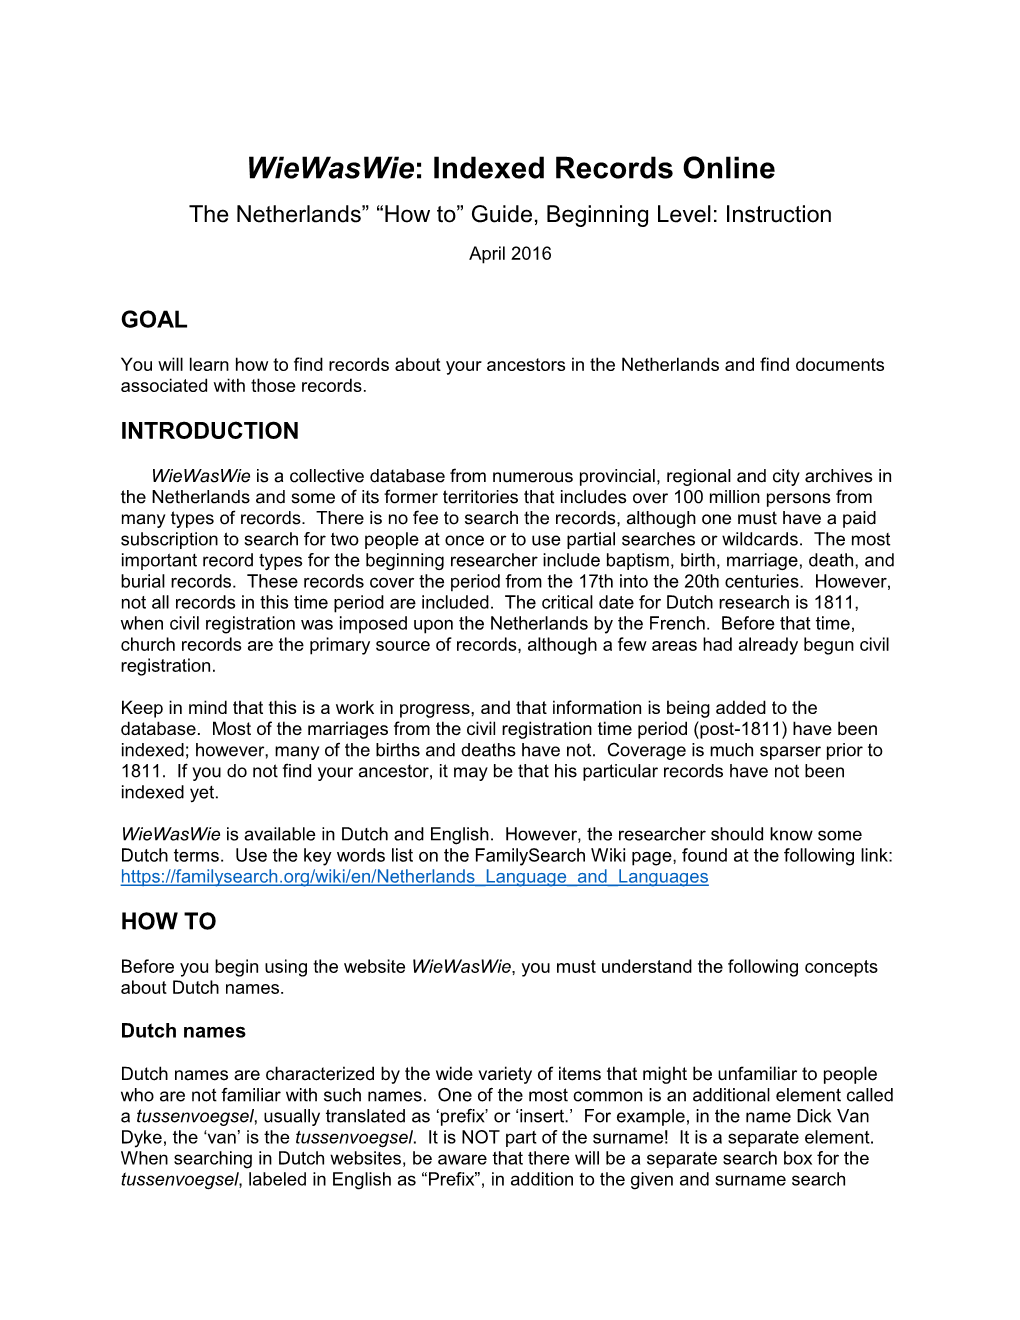 Wiewaswie: Indexed Records Online Instructions